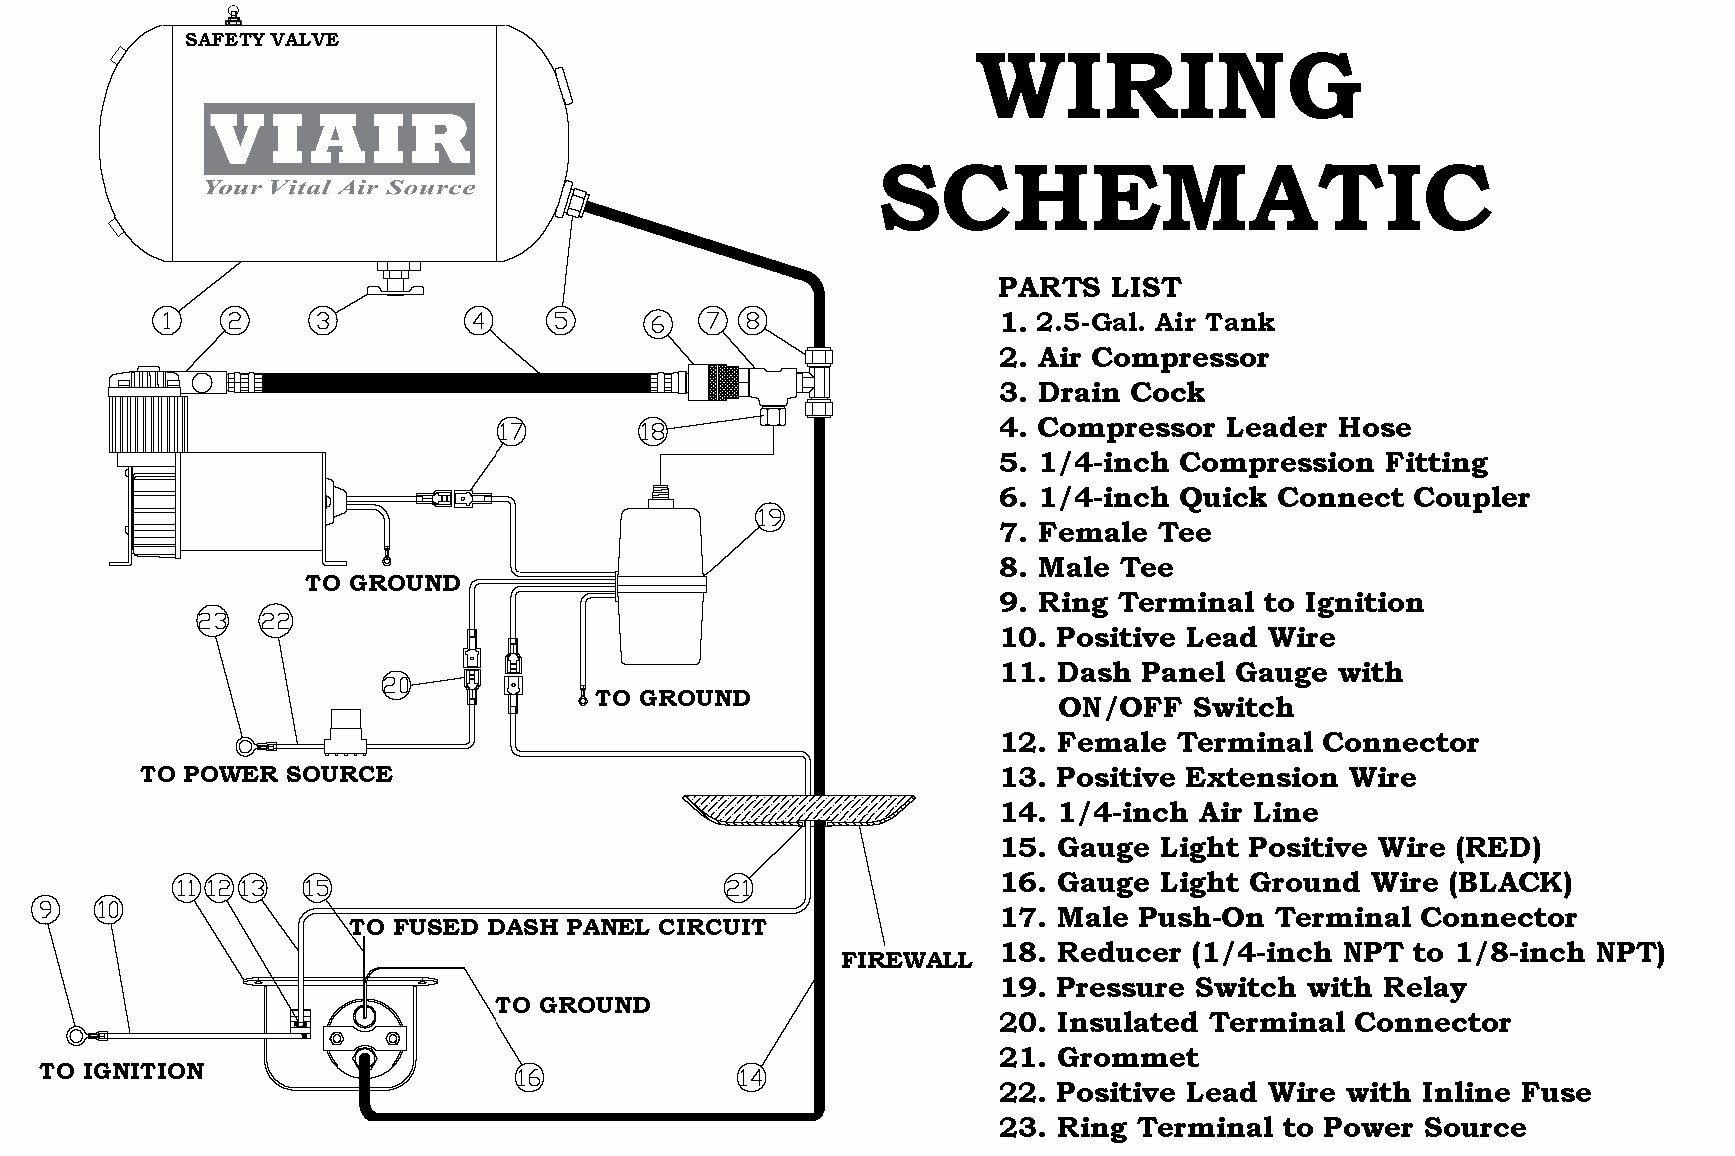 Horn Wiring Diagram with Relay Fresh Horn Wiring Diagram with Relay Diagram Of Horn Wiring Diagram with Relay